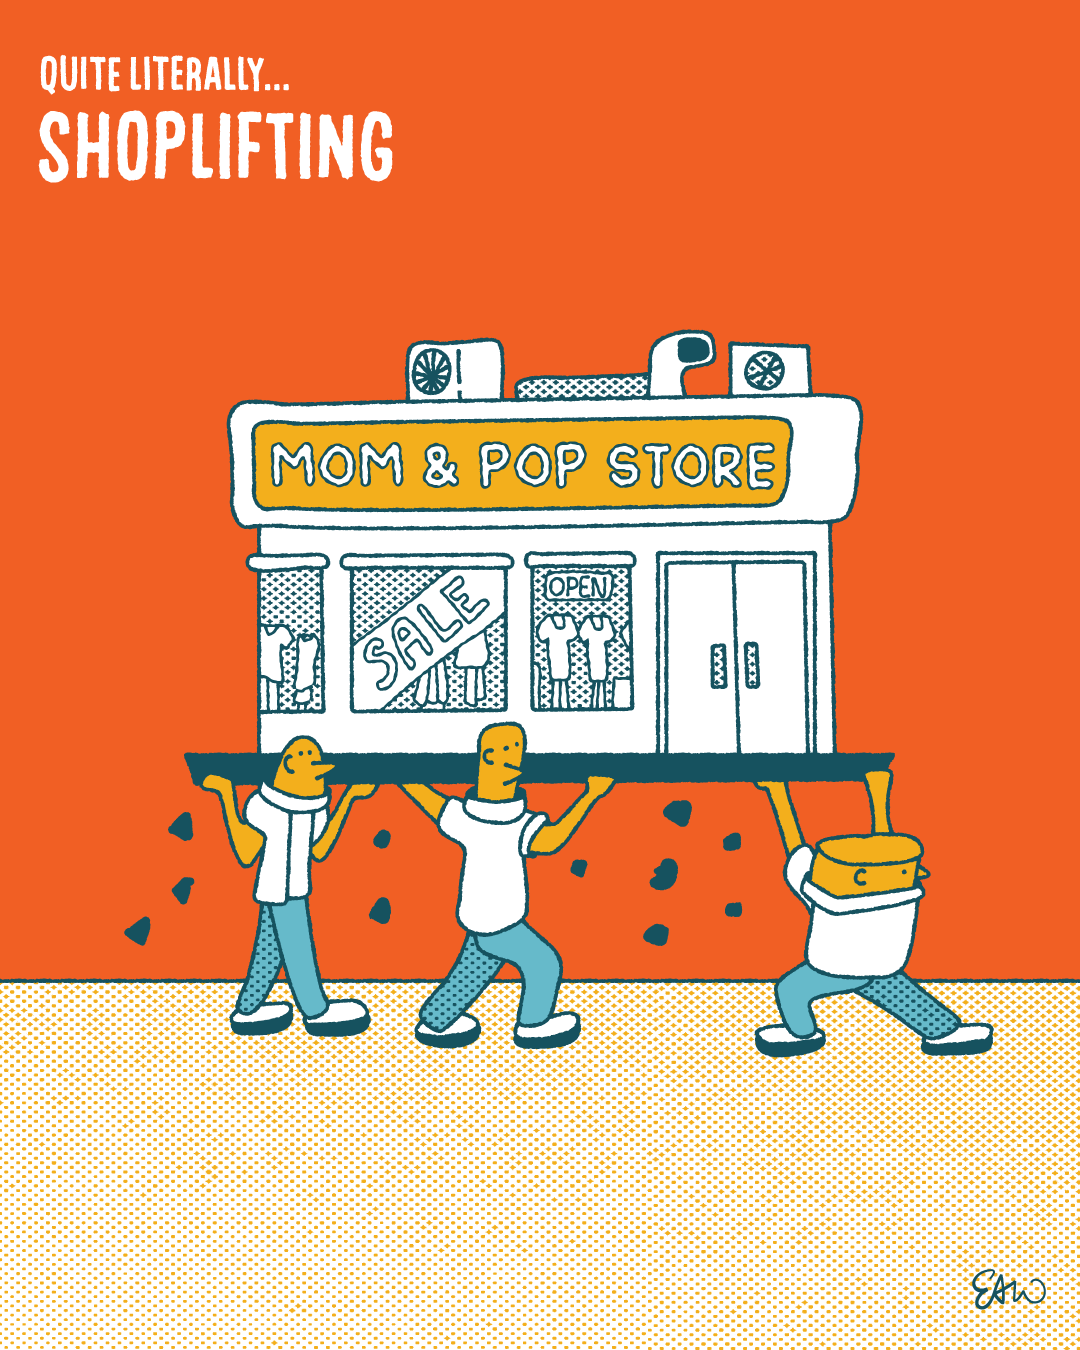 Single panel comic drawn in a retro style with vintage tones of teal, orange, and yellow. The characters are lifting a small building above their shoulders. The sign on the building says, “Mom & Pop Store,” and there is signage in the window that says “Sale” and “Open.” The caption reads, “Quite literally... Shoplifting.”